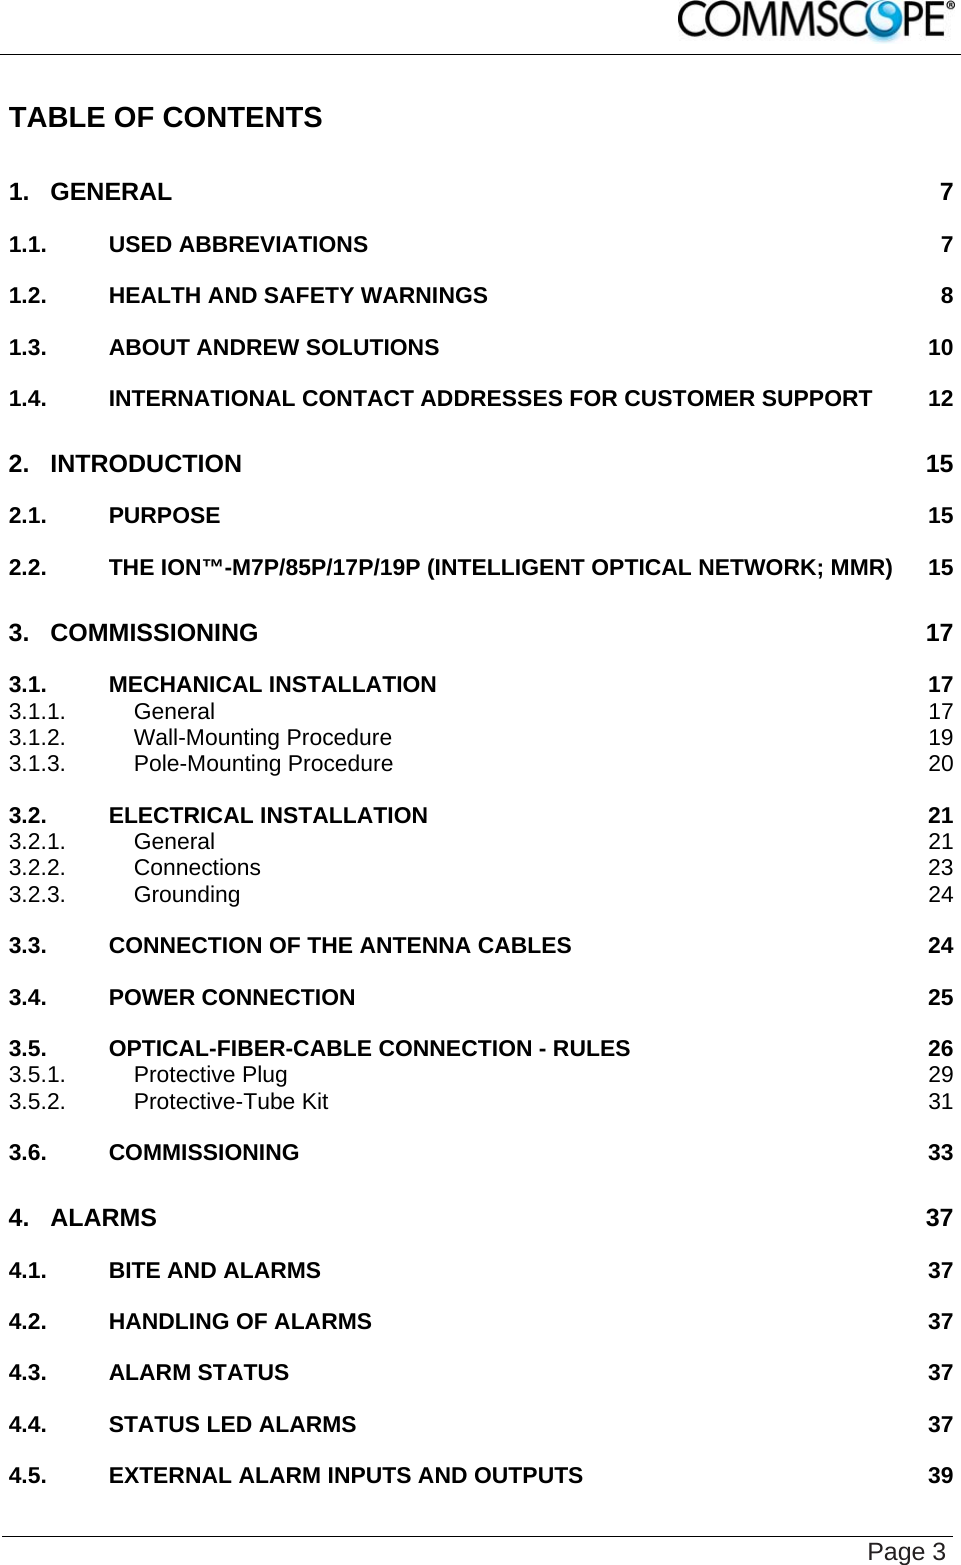    Page 3 TABLE OF CONTENTS 1. GENERAL 7 1.1. USED ABBREVIATIONS 7 1.2. HEALTH AND SAFETY WARNINGS 8 1.3. ABOUT ANDREW SOLUTIONS 10 1.4. INTERNATIONAL CONTACT ADDRESSES FOR CUSTOMER SUPPORT 12 2. INTRODUCTION 15 2.1. PURPOSE 15 2.2. THE ION™-M7P/85P/17P/19P (INTELLIGENT OPTICAL NETWORK; MMR) 15 3. COMMISSIONING 17 3.1. MECHANICAL INSTALLATION 17 3.1.1. General 17 3.1.2. Wall-Mounting Procedure 19 3.1.3. Pole-Mounting Procedure 20 3.2. ELECTRICAL INSTALLATION 21 3.2.1. General 21 3.2.2. Connections 23 3.2.3. Grounding 24 3.3. CONNECTION OF THE ANTENNA CABLES 24 3.4. POWER CONNECTION 25 3.5. OPTICAL-FIBER-CABLE CONNECTION - RULES 26 3.5.1. Protective Plug 29 3.5.2. Protective-Tube Kit 31 3.6. COMMISSIONING 33 4. ALARMS 37 4.1. BITE AND ALARMS 37 4.2. HANDLING OF ALARMS 37 4.3. ALARM STATUS 37 4.4. STATUS LED ALARMS 37 4.5. EXTERNAL ALARM INPUTS AND OUTPUTS 39 